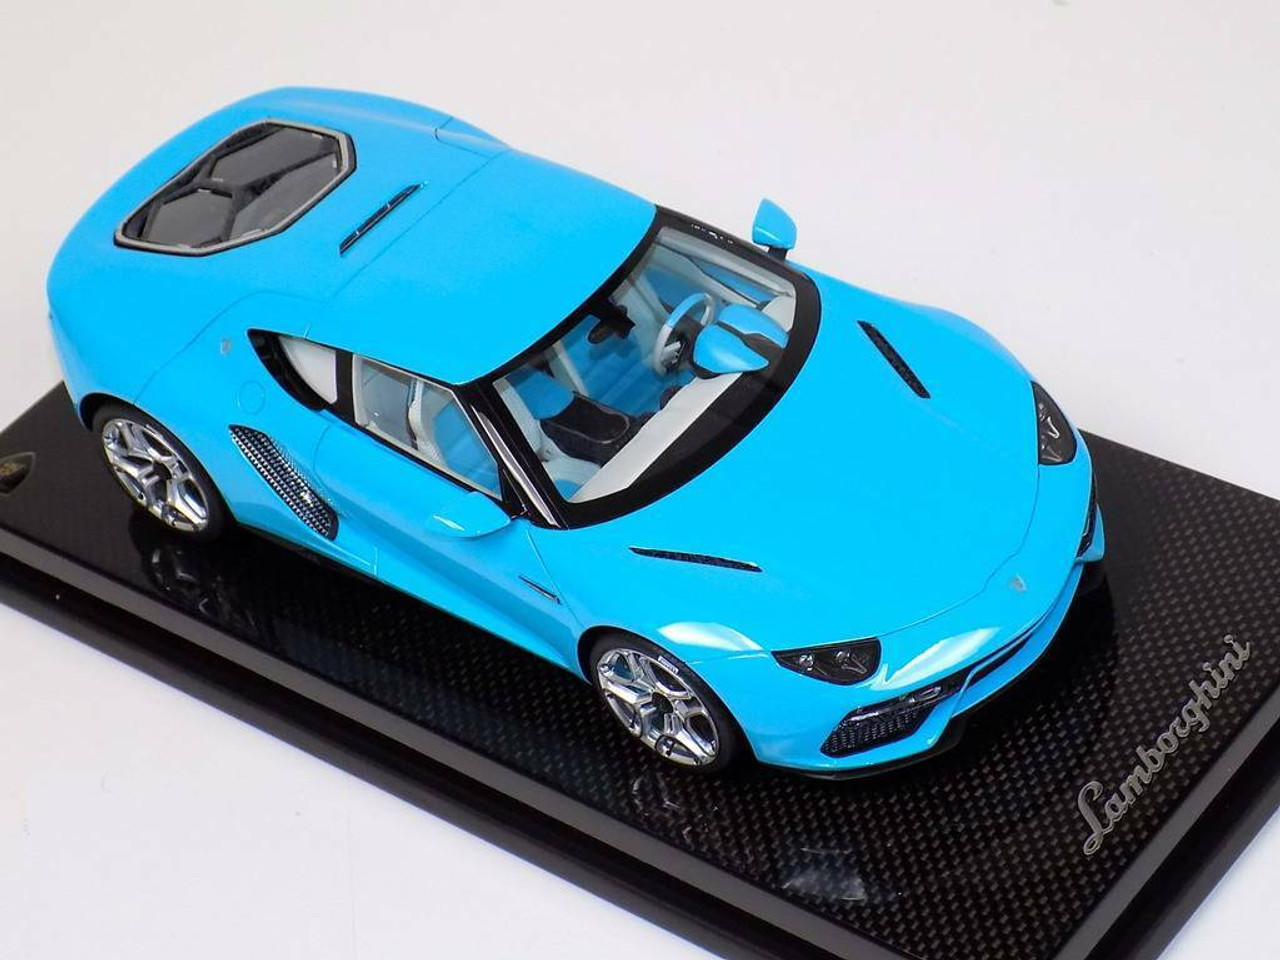 1/18 MR Collection Lamborghini Asterion LPI 910-4 (Baby Blue) #1/25 Limited